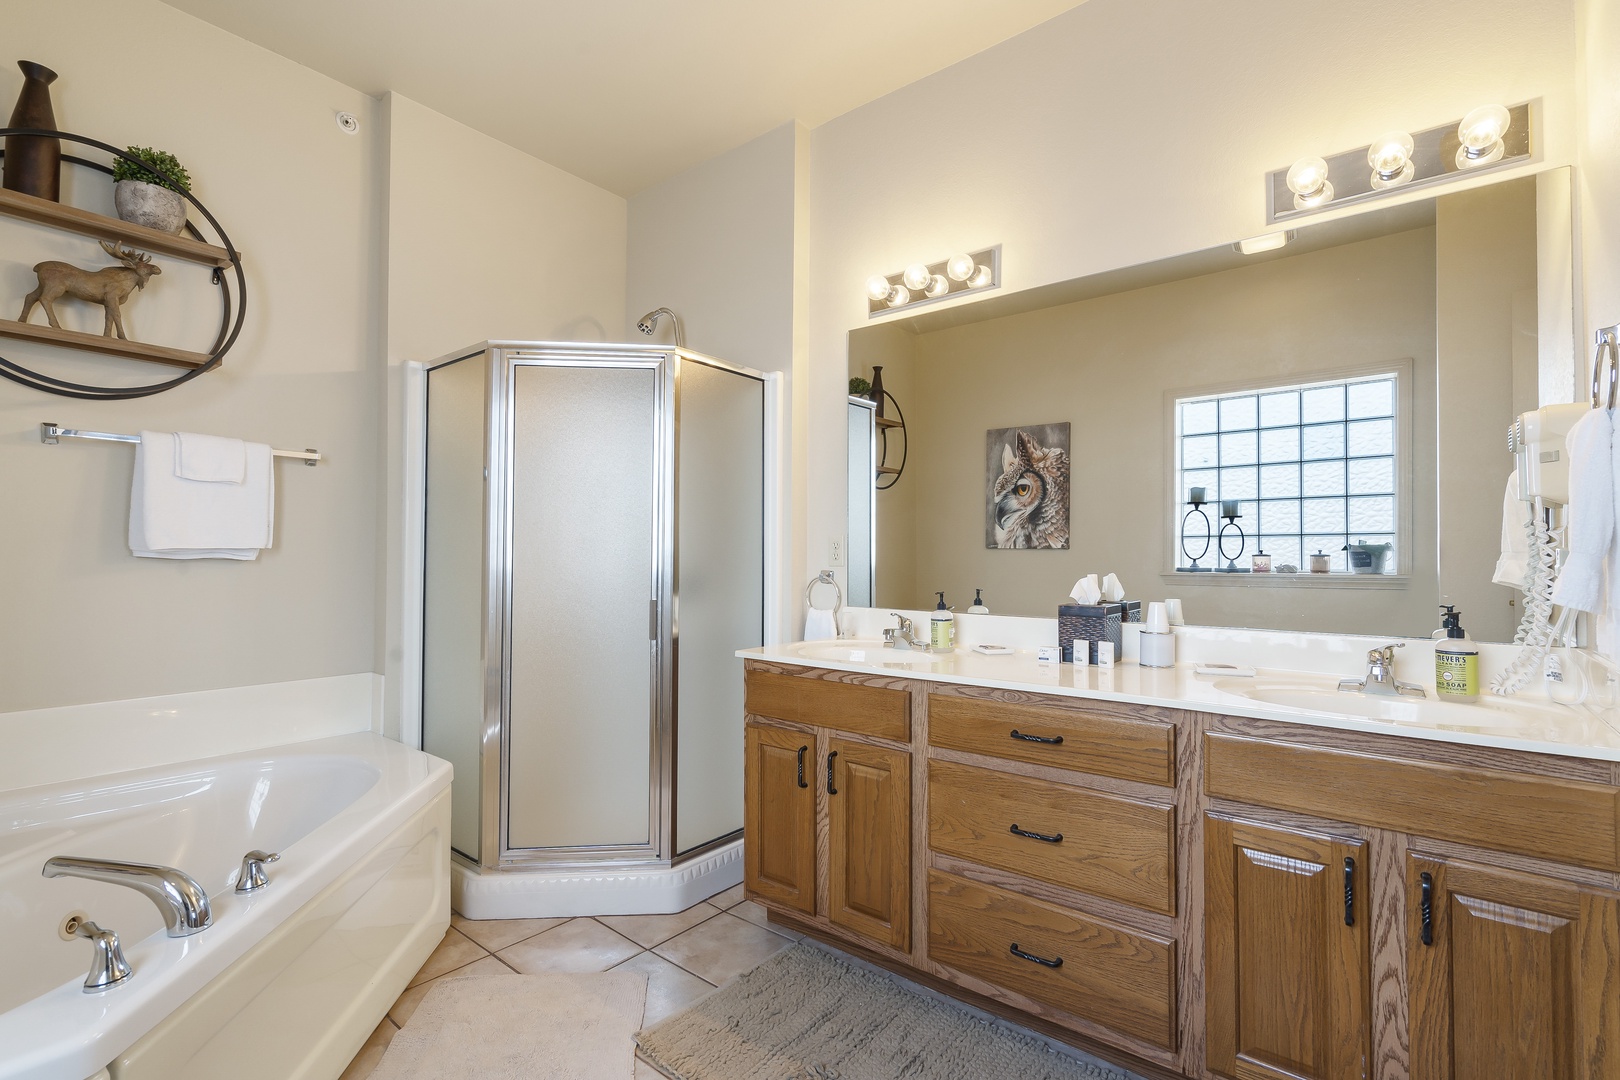 En-suite with separate shower and soaking tub